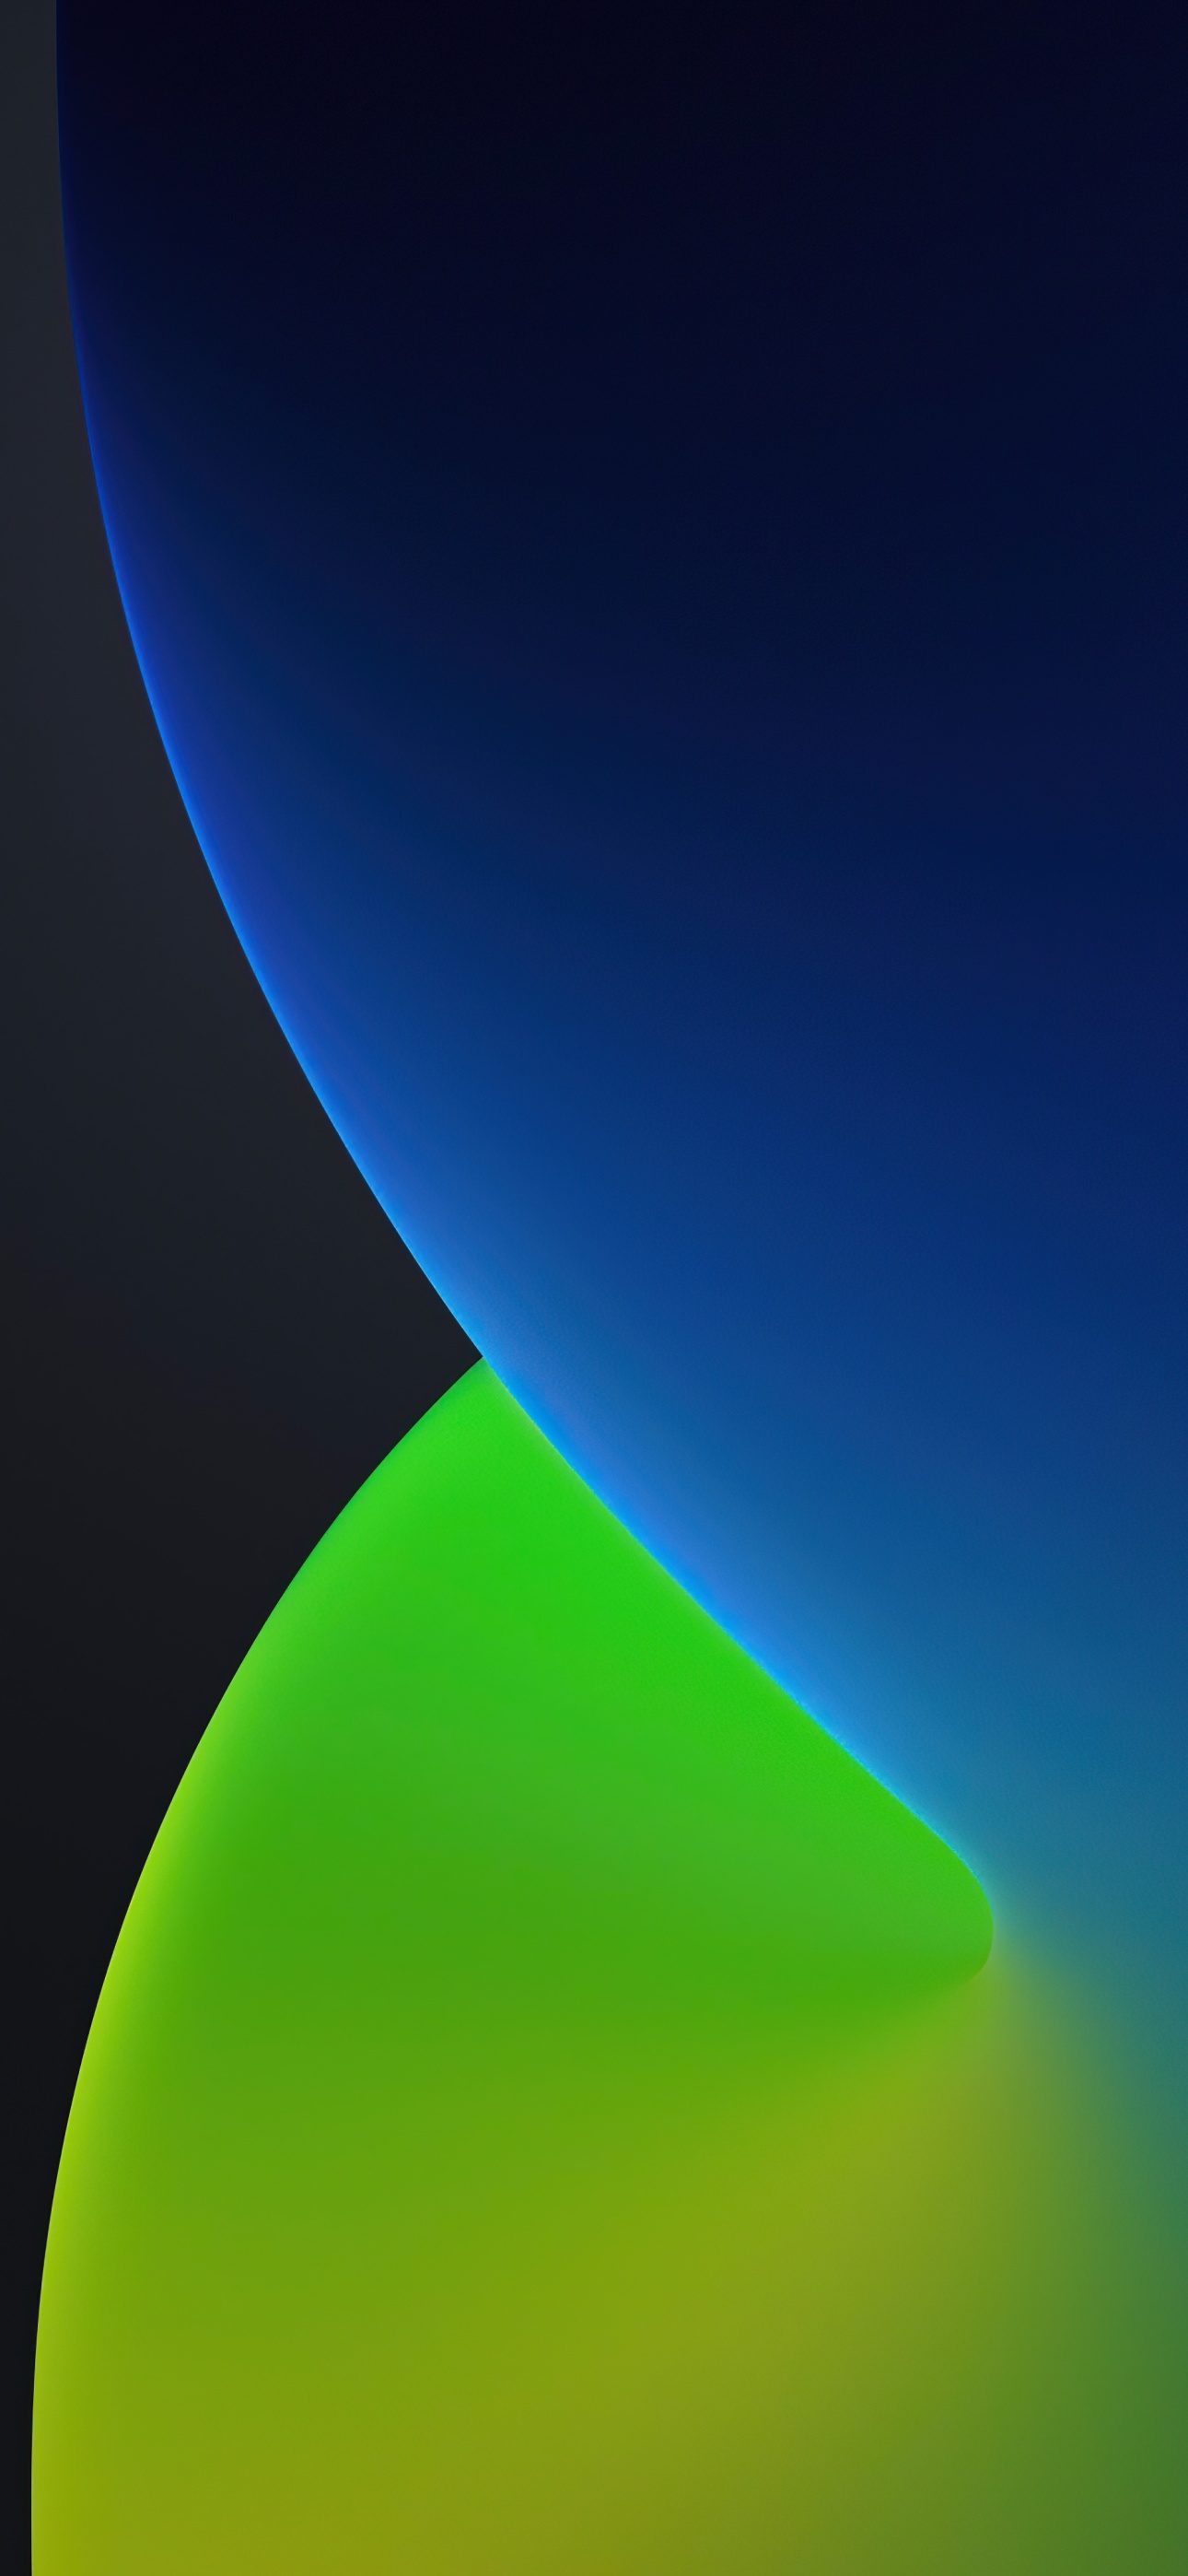 720x1280 Meizu Wallpapers for Mobile Phone [HD]